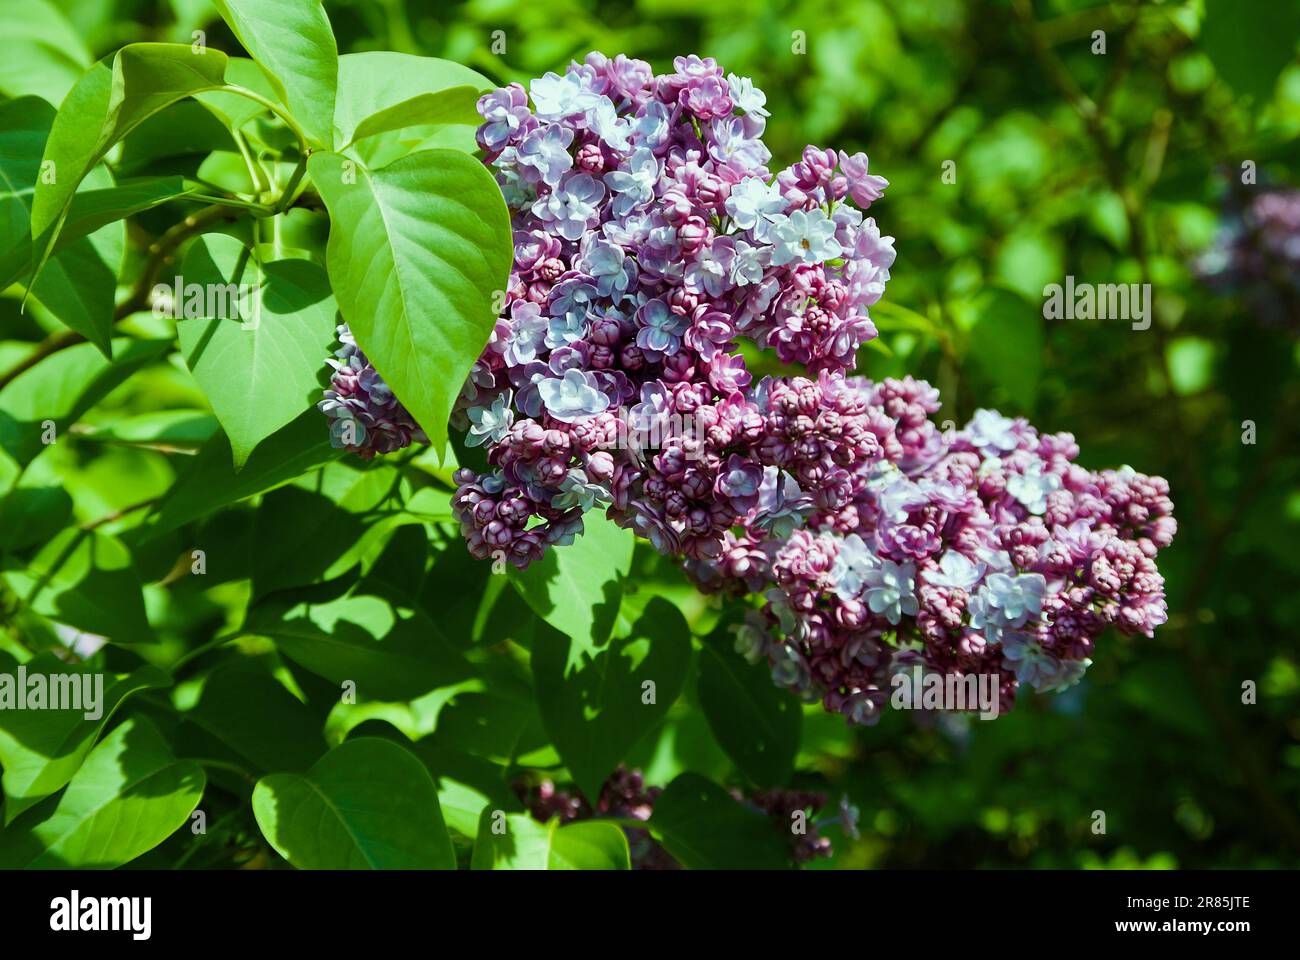 Lilac bush with green leaf and fragrant purple flower clusters in spring. Stock Photo